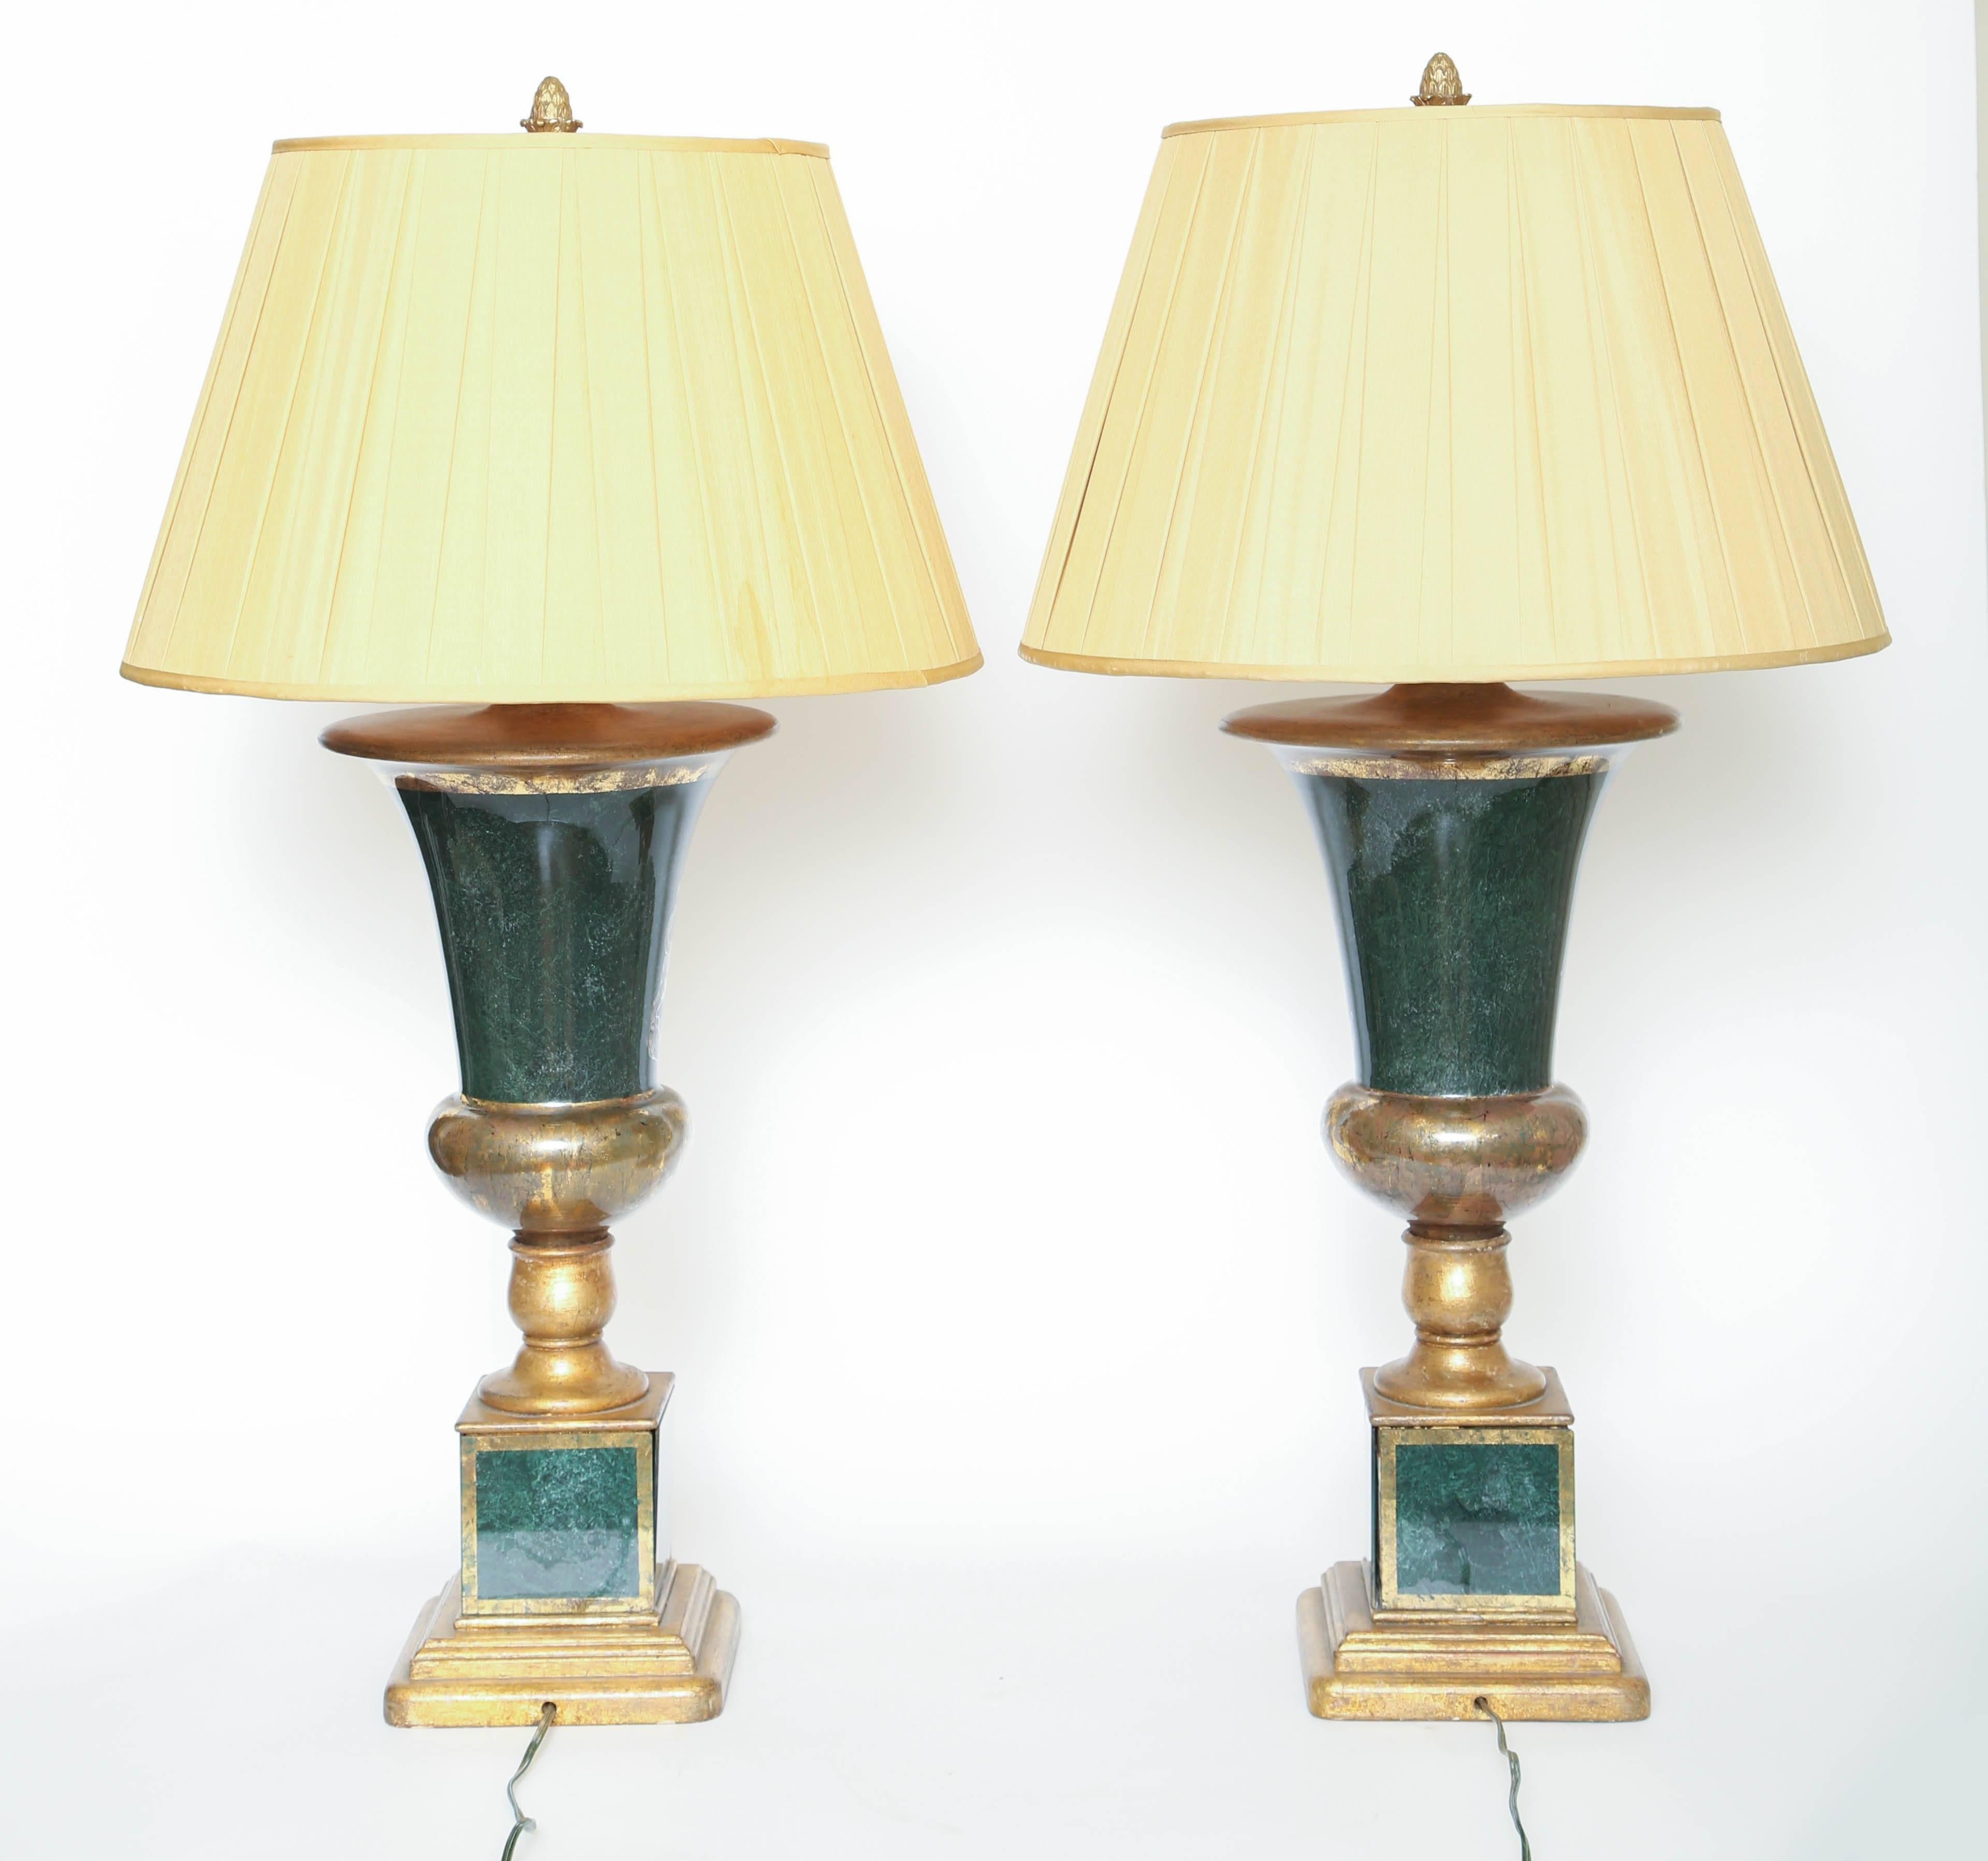 20th Century Stunning Pair of Vintage Decalcomania Armorial Lamps For Sale